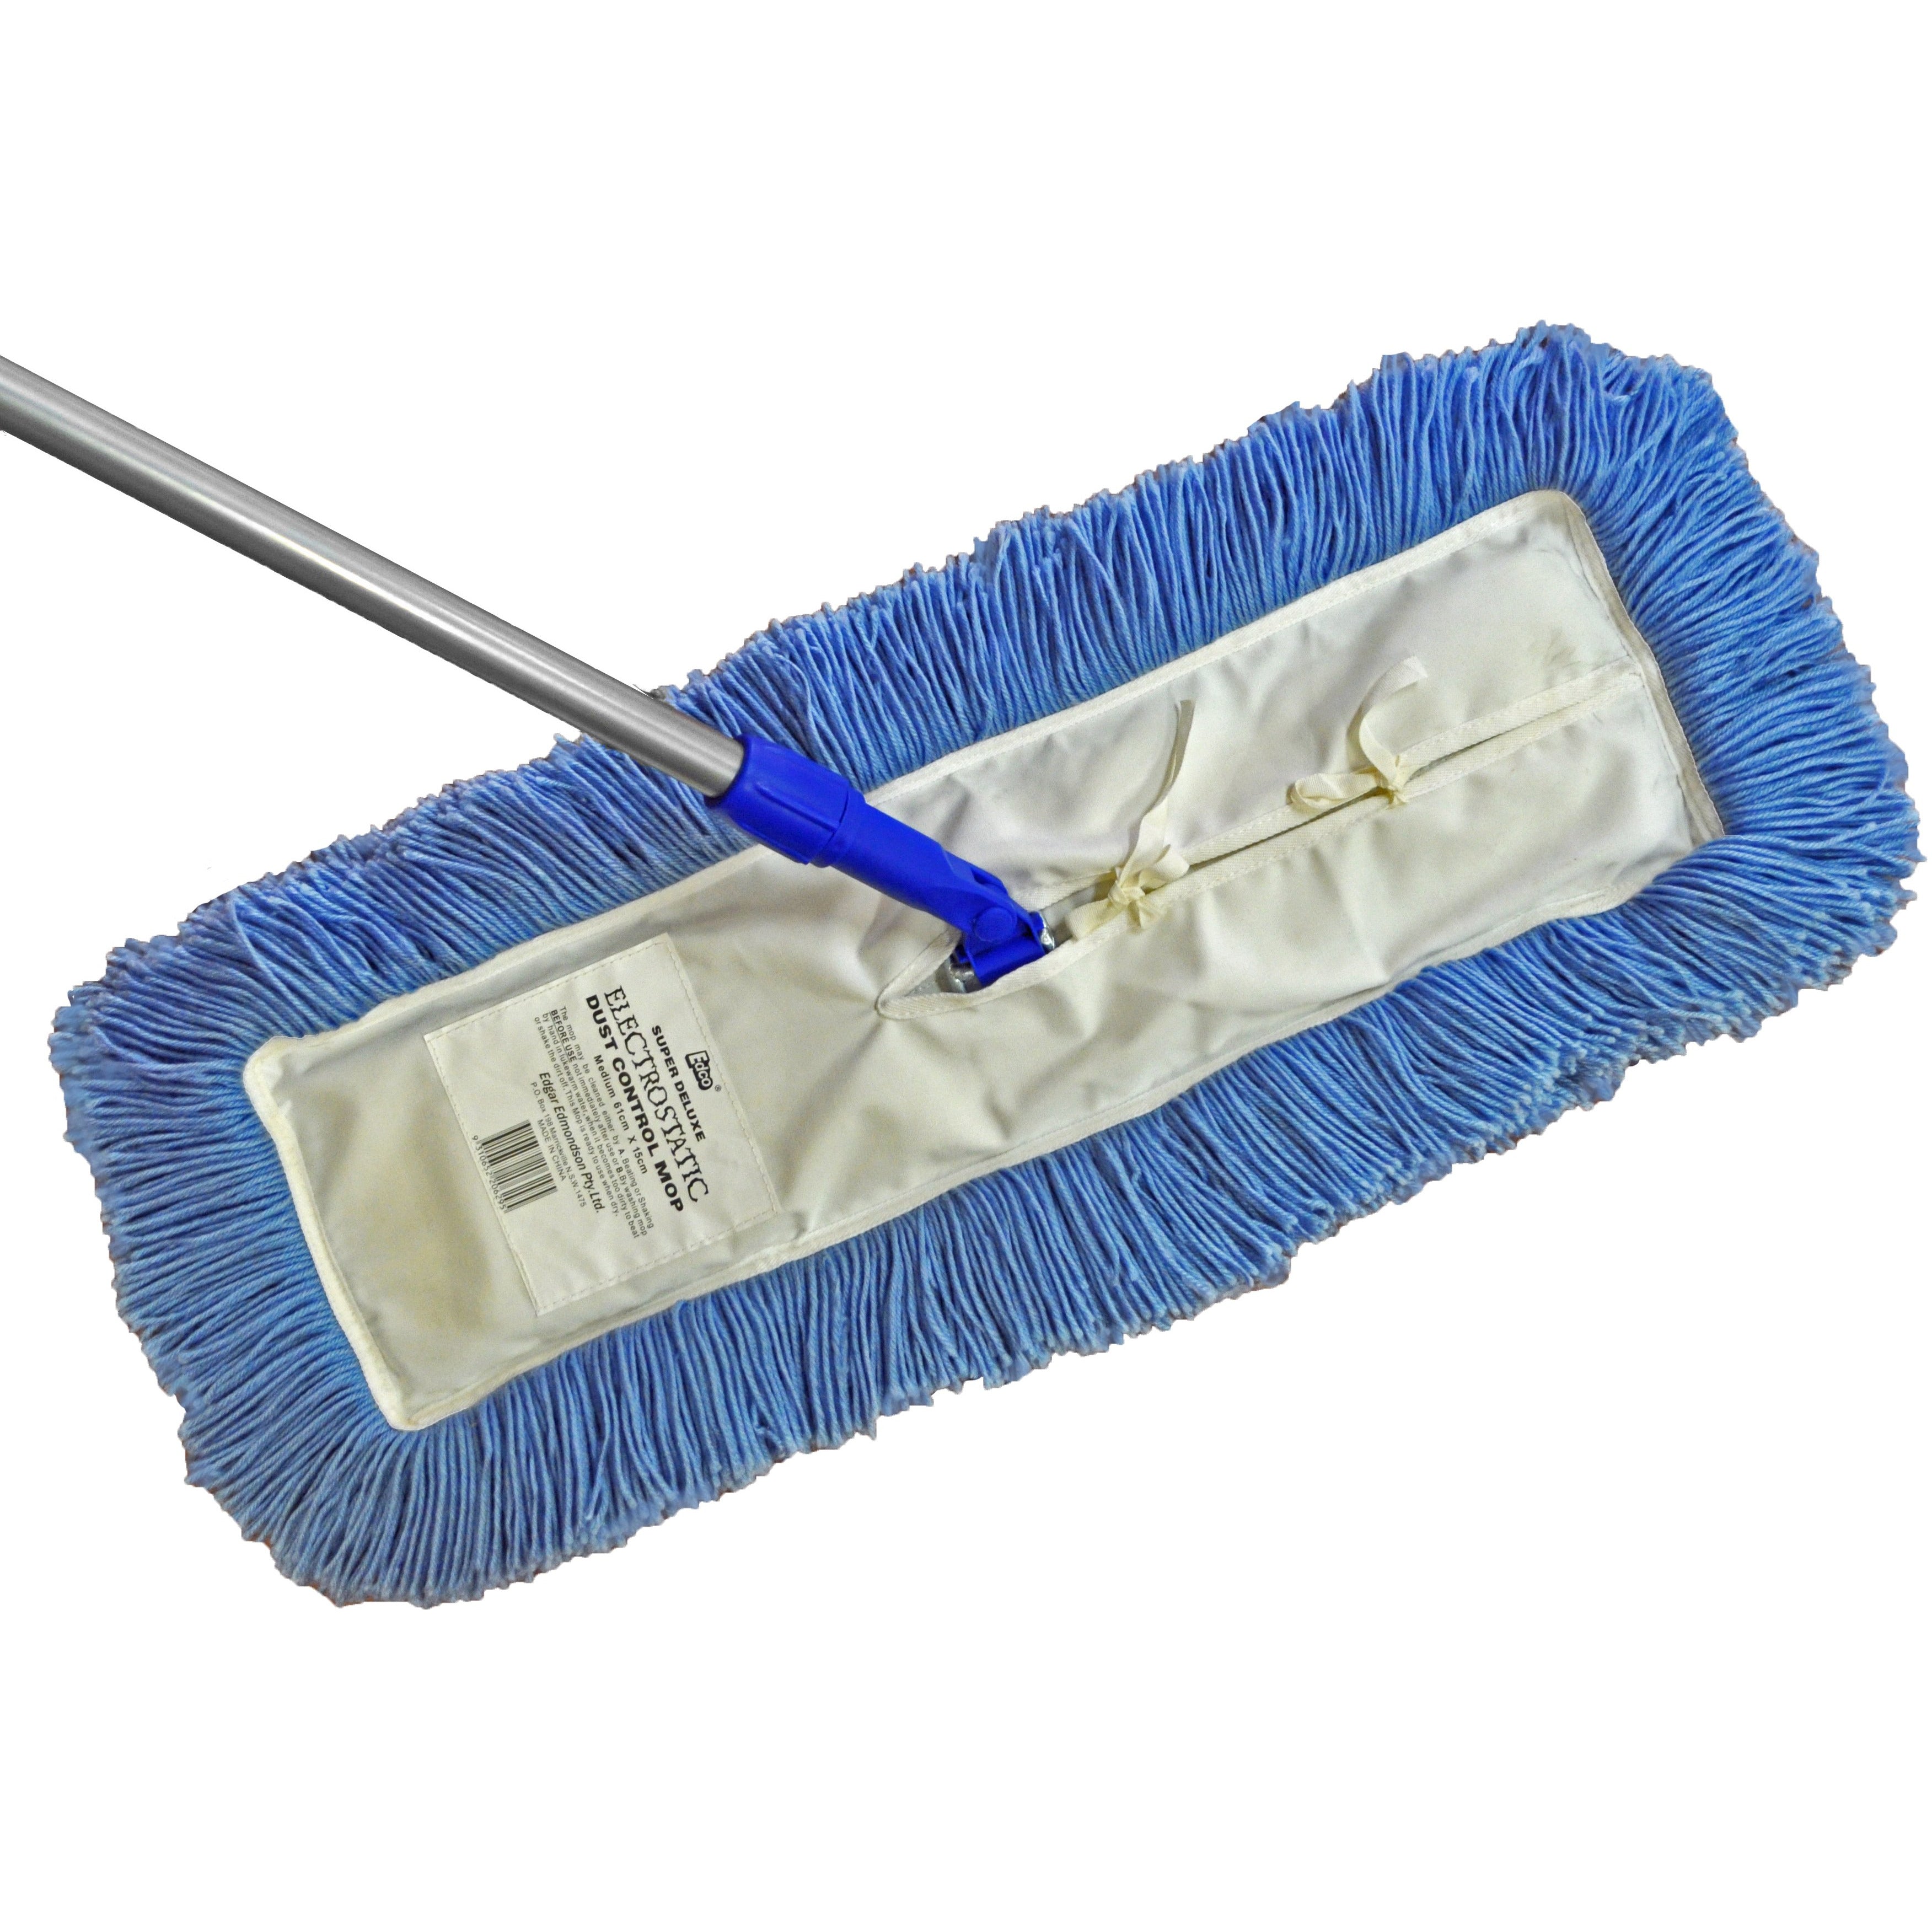 EDCO DUST CONTROL MOP COMPLETE WITH HEAD & HANDLE SMALL 30CM X 10CM